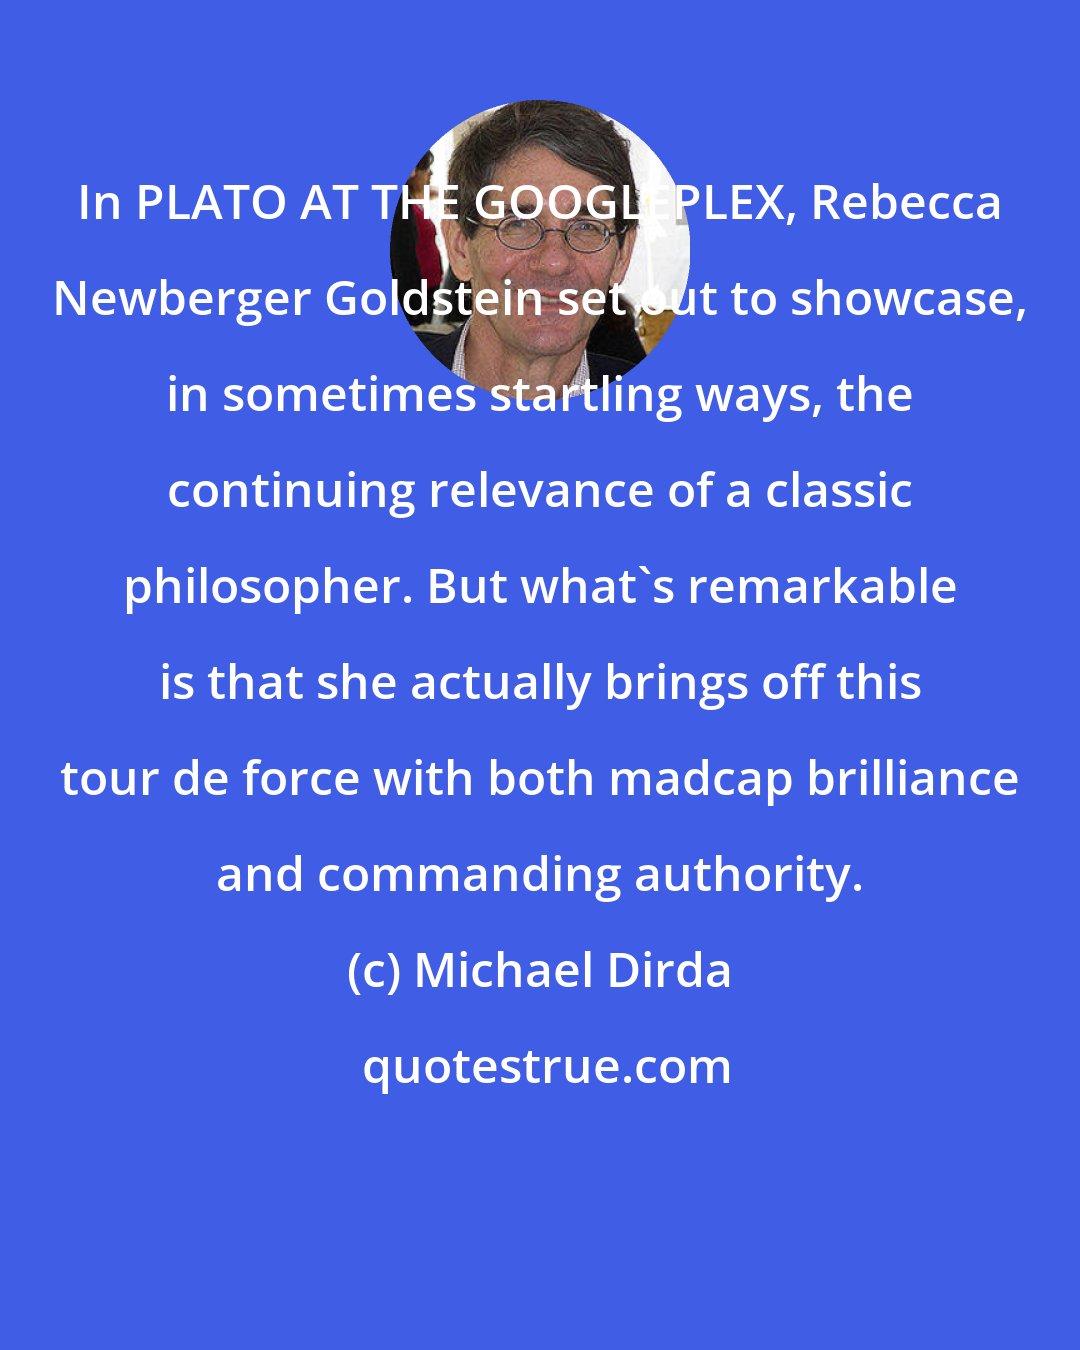 Michael Dirda: In PLATO AT THE GOOGLEPLEX, Rebecca Newberger Goldstein set out to showcase, in sometimes startling ways, the continuing relevance of a classic philosopher. But what's remarkable is that she actually brings off this tour de force with both madcap brilliance and commanding authority.